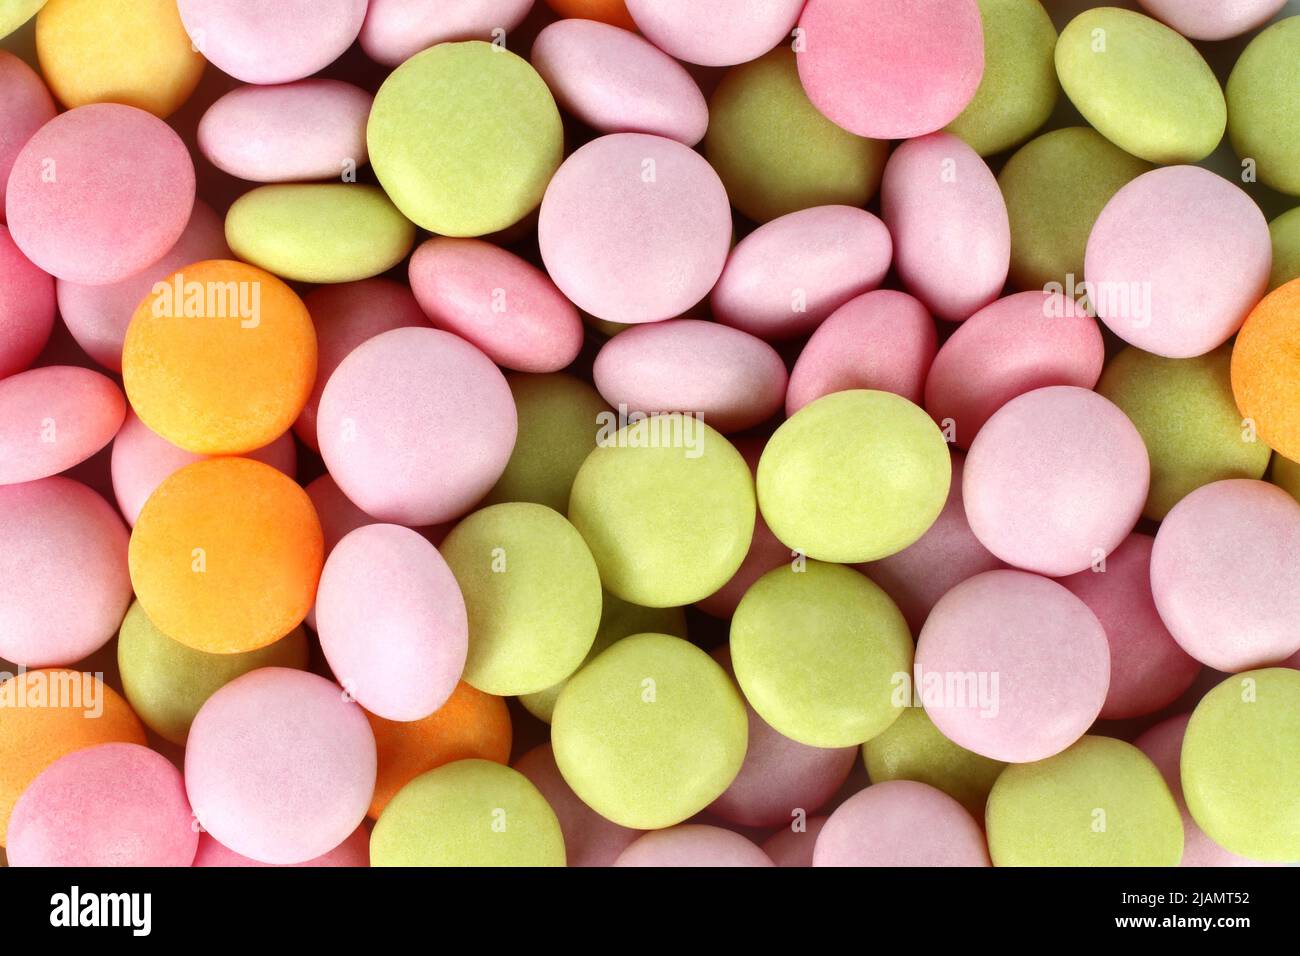 Background of colorful round candies close-up with texture Stock Photo